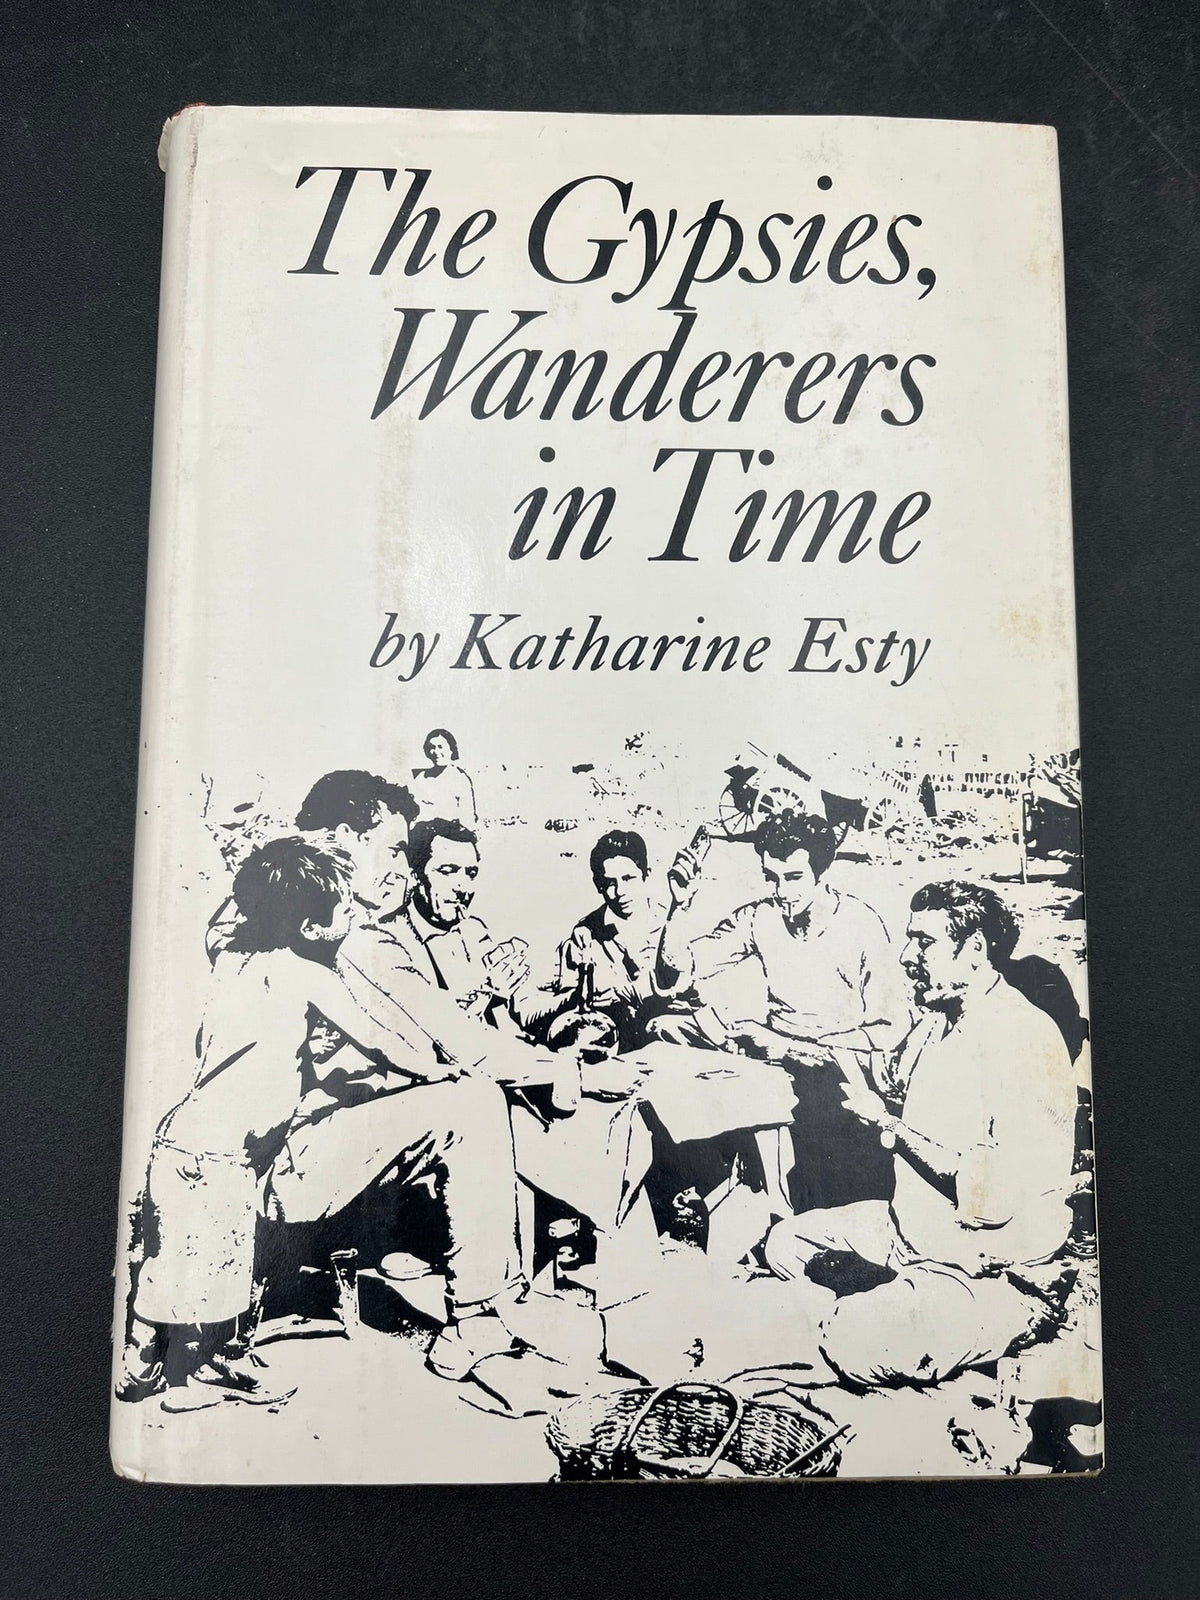 The Gypsies, Wanderers in Time